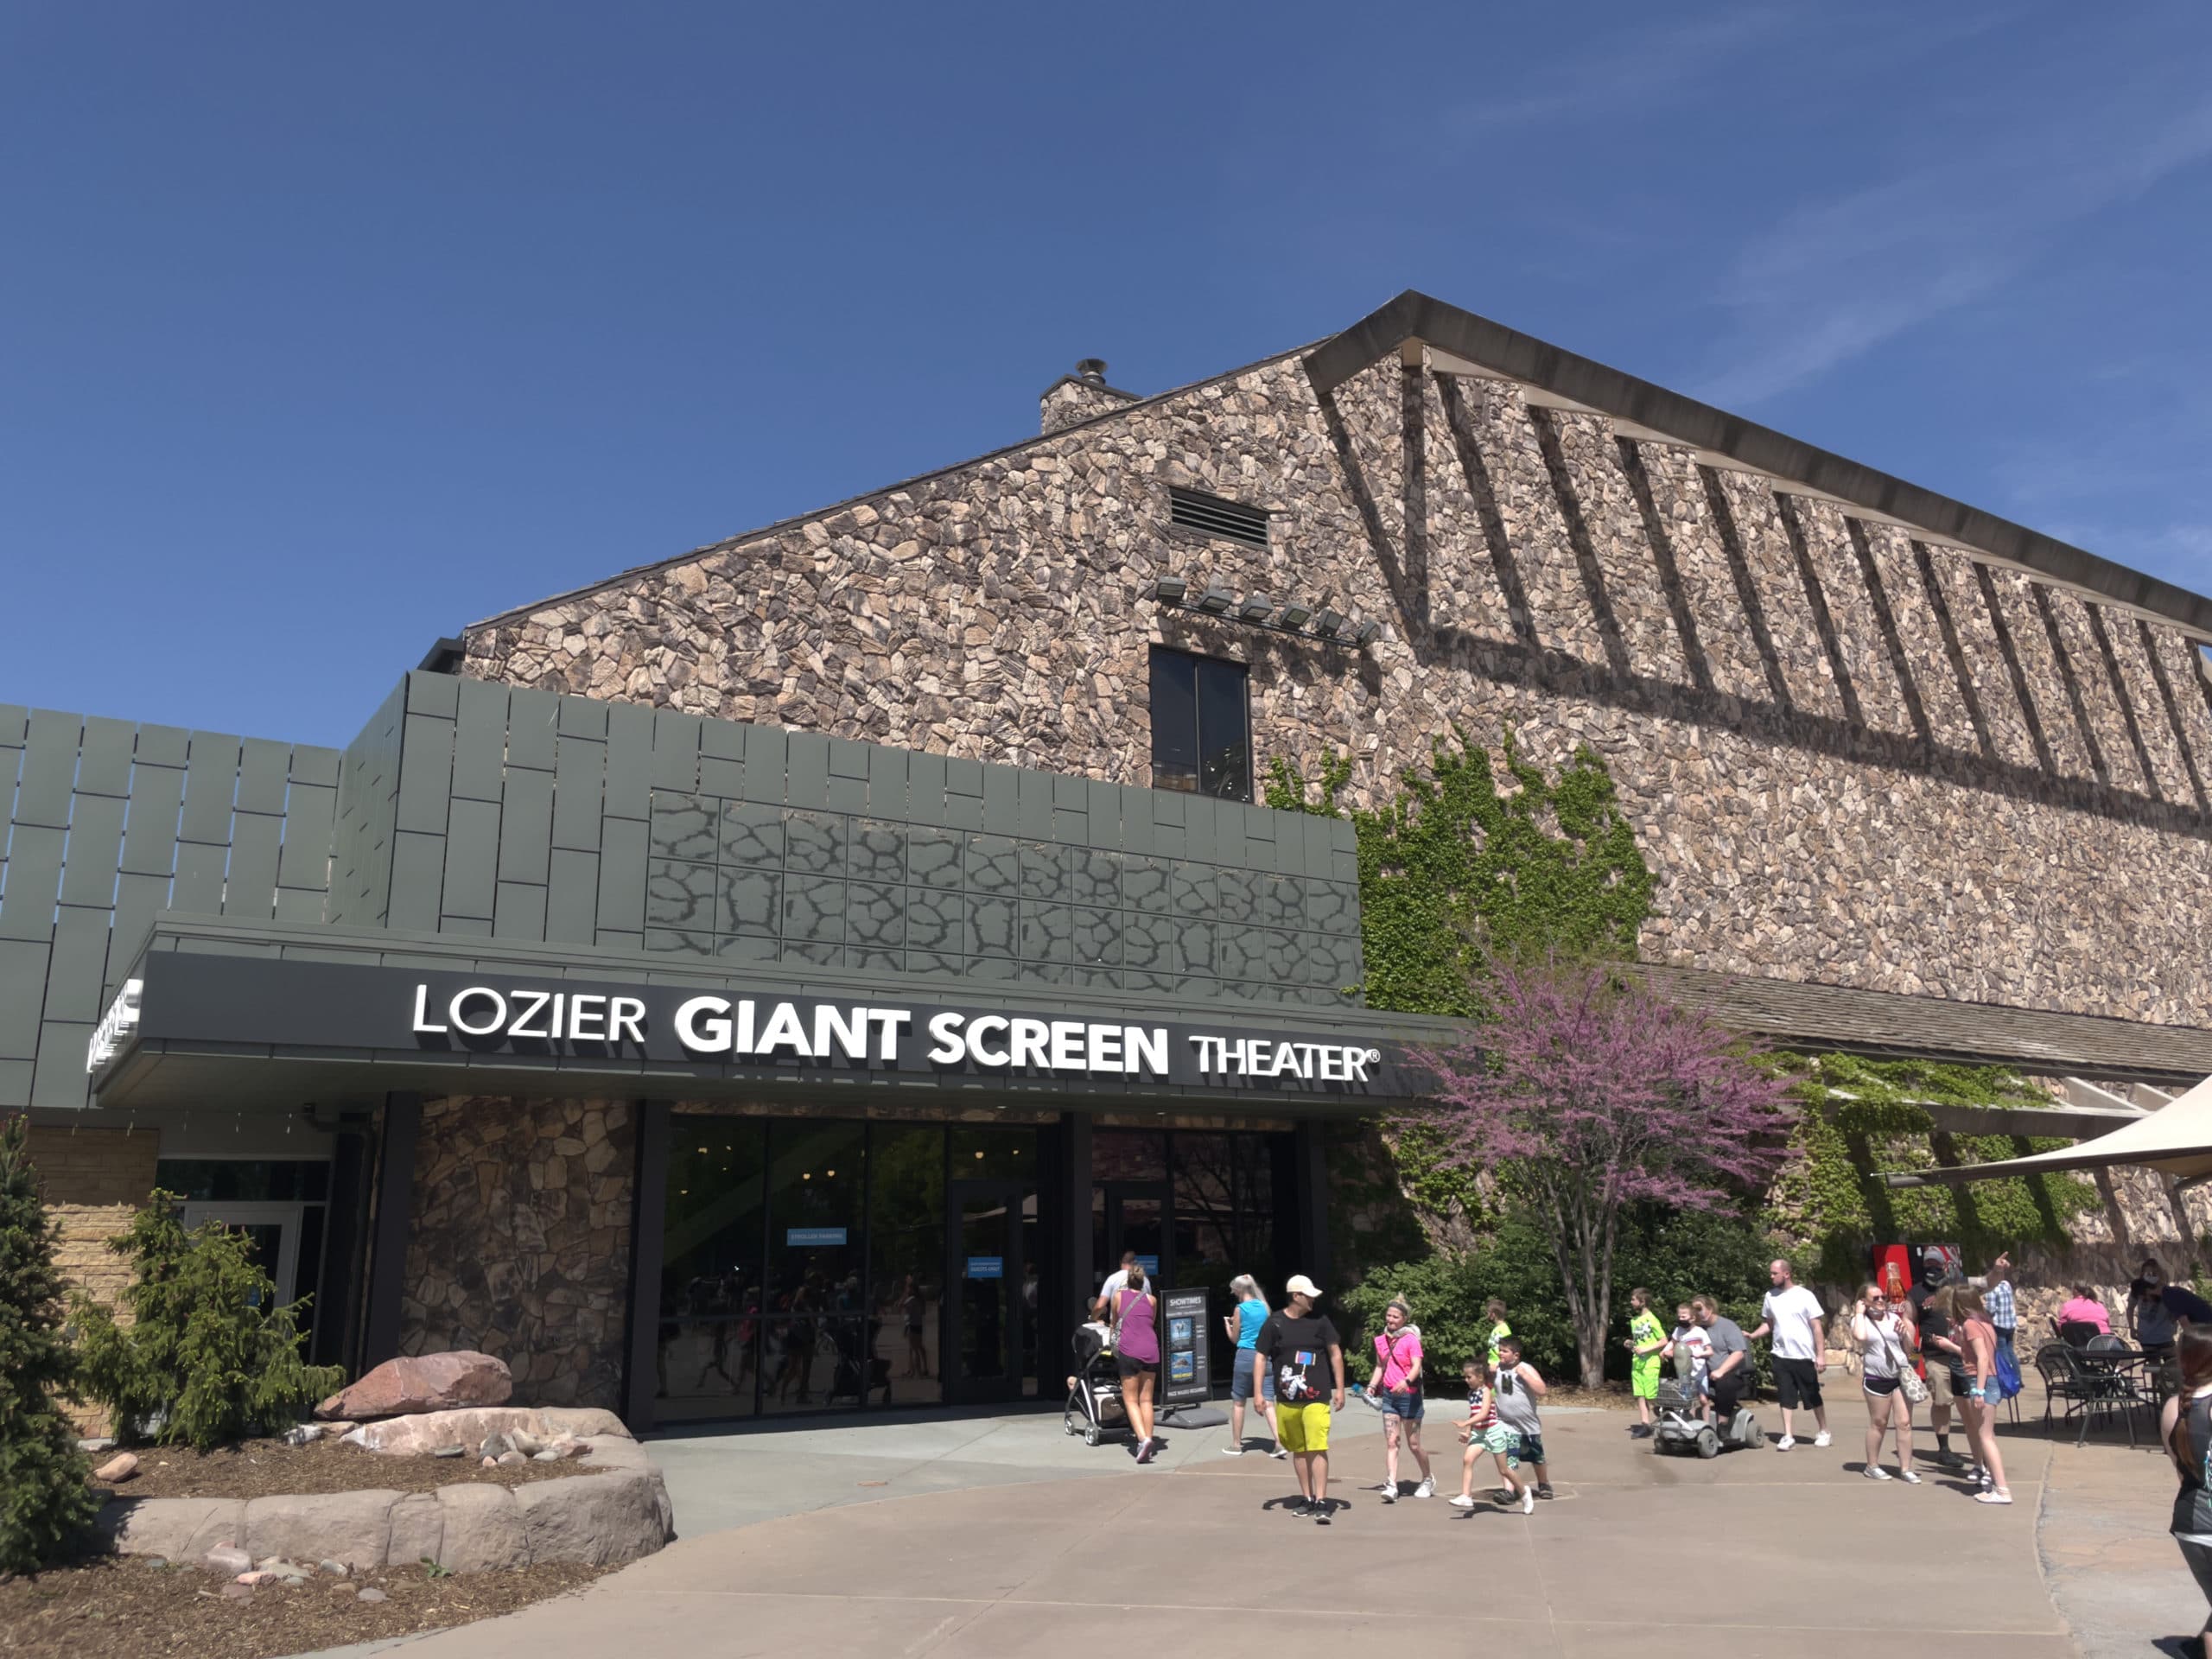 A large building with "Lozier Giant Screen Theater" on the sign. 